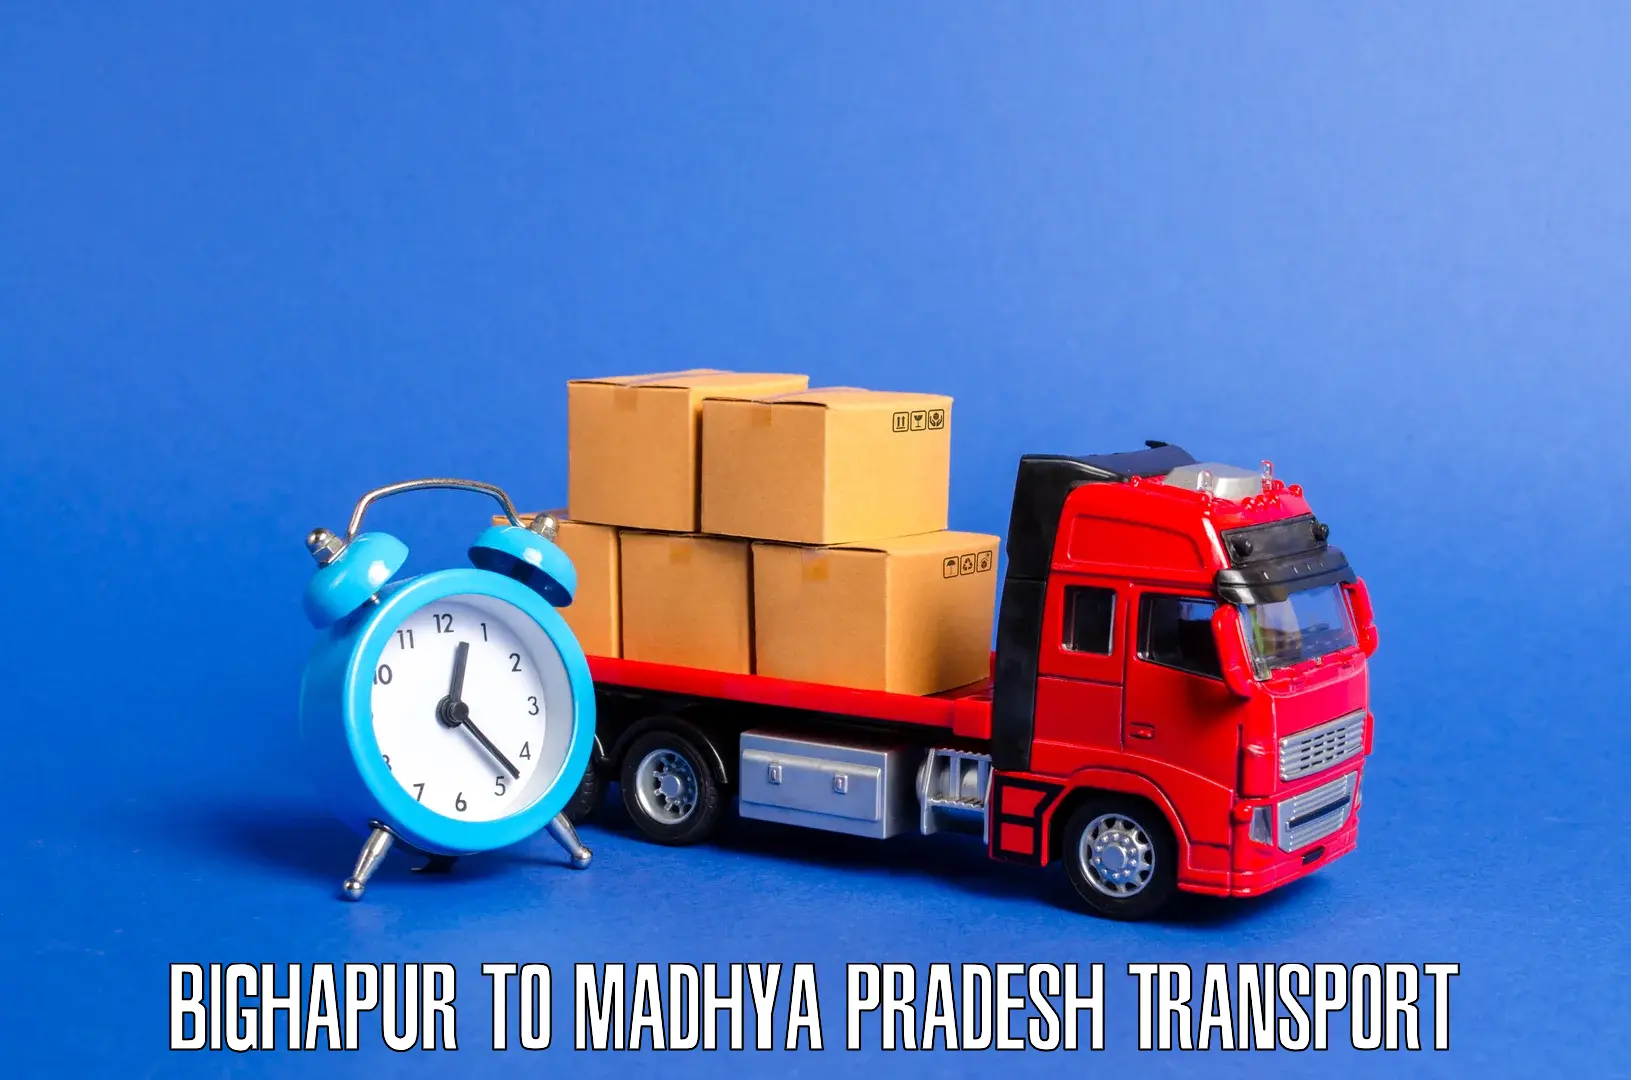 Goods delivery service Bighapur to Shahdol